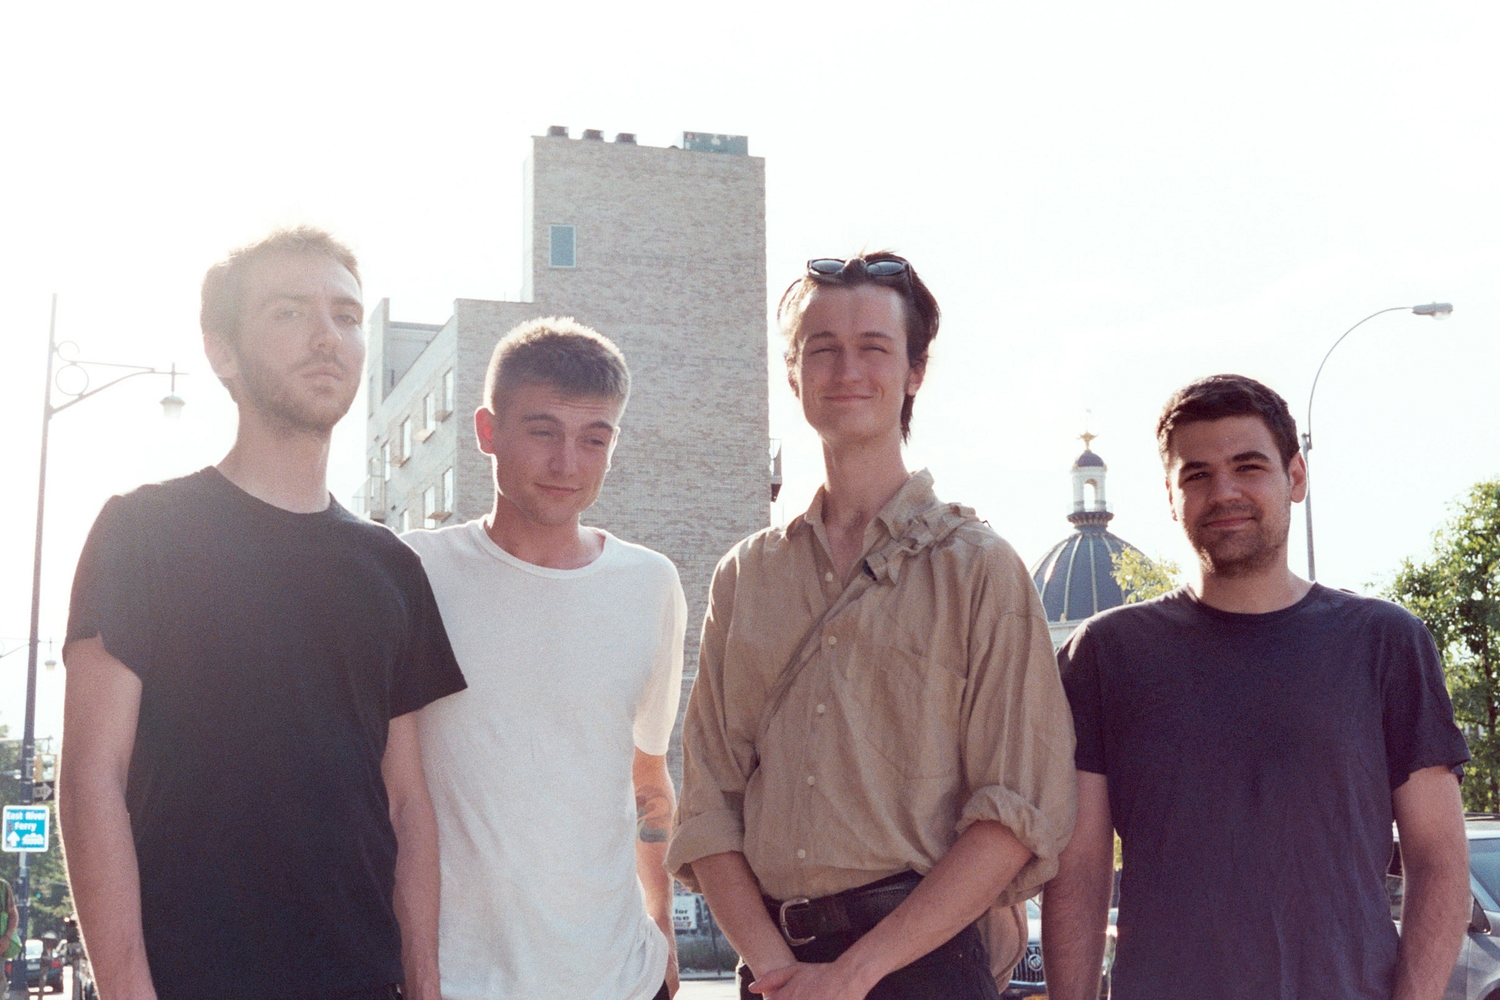 Ought: “We wouldn’t trade this for anything”